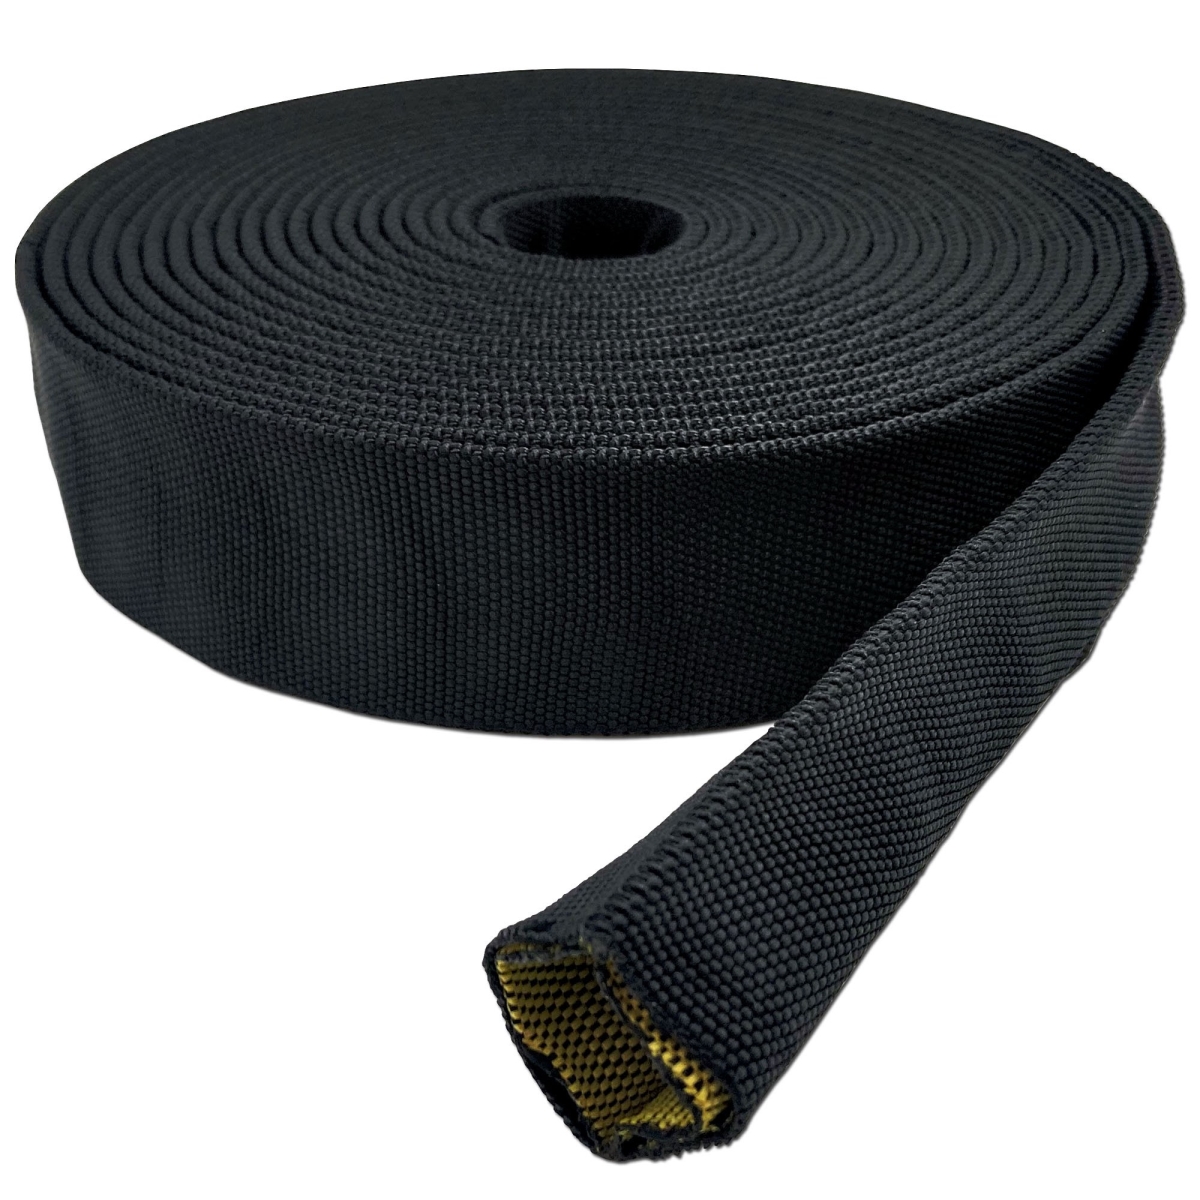 Picture of Electriduct BS-J-BURST-350-100-BK 3.5 in. x 100 ft. Burst Protection Multifilament Nylon Braided Sleeving - Black